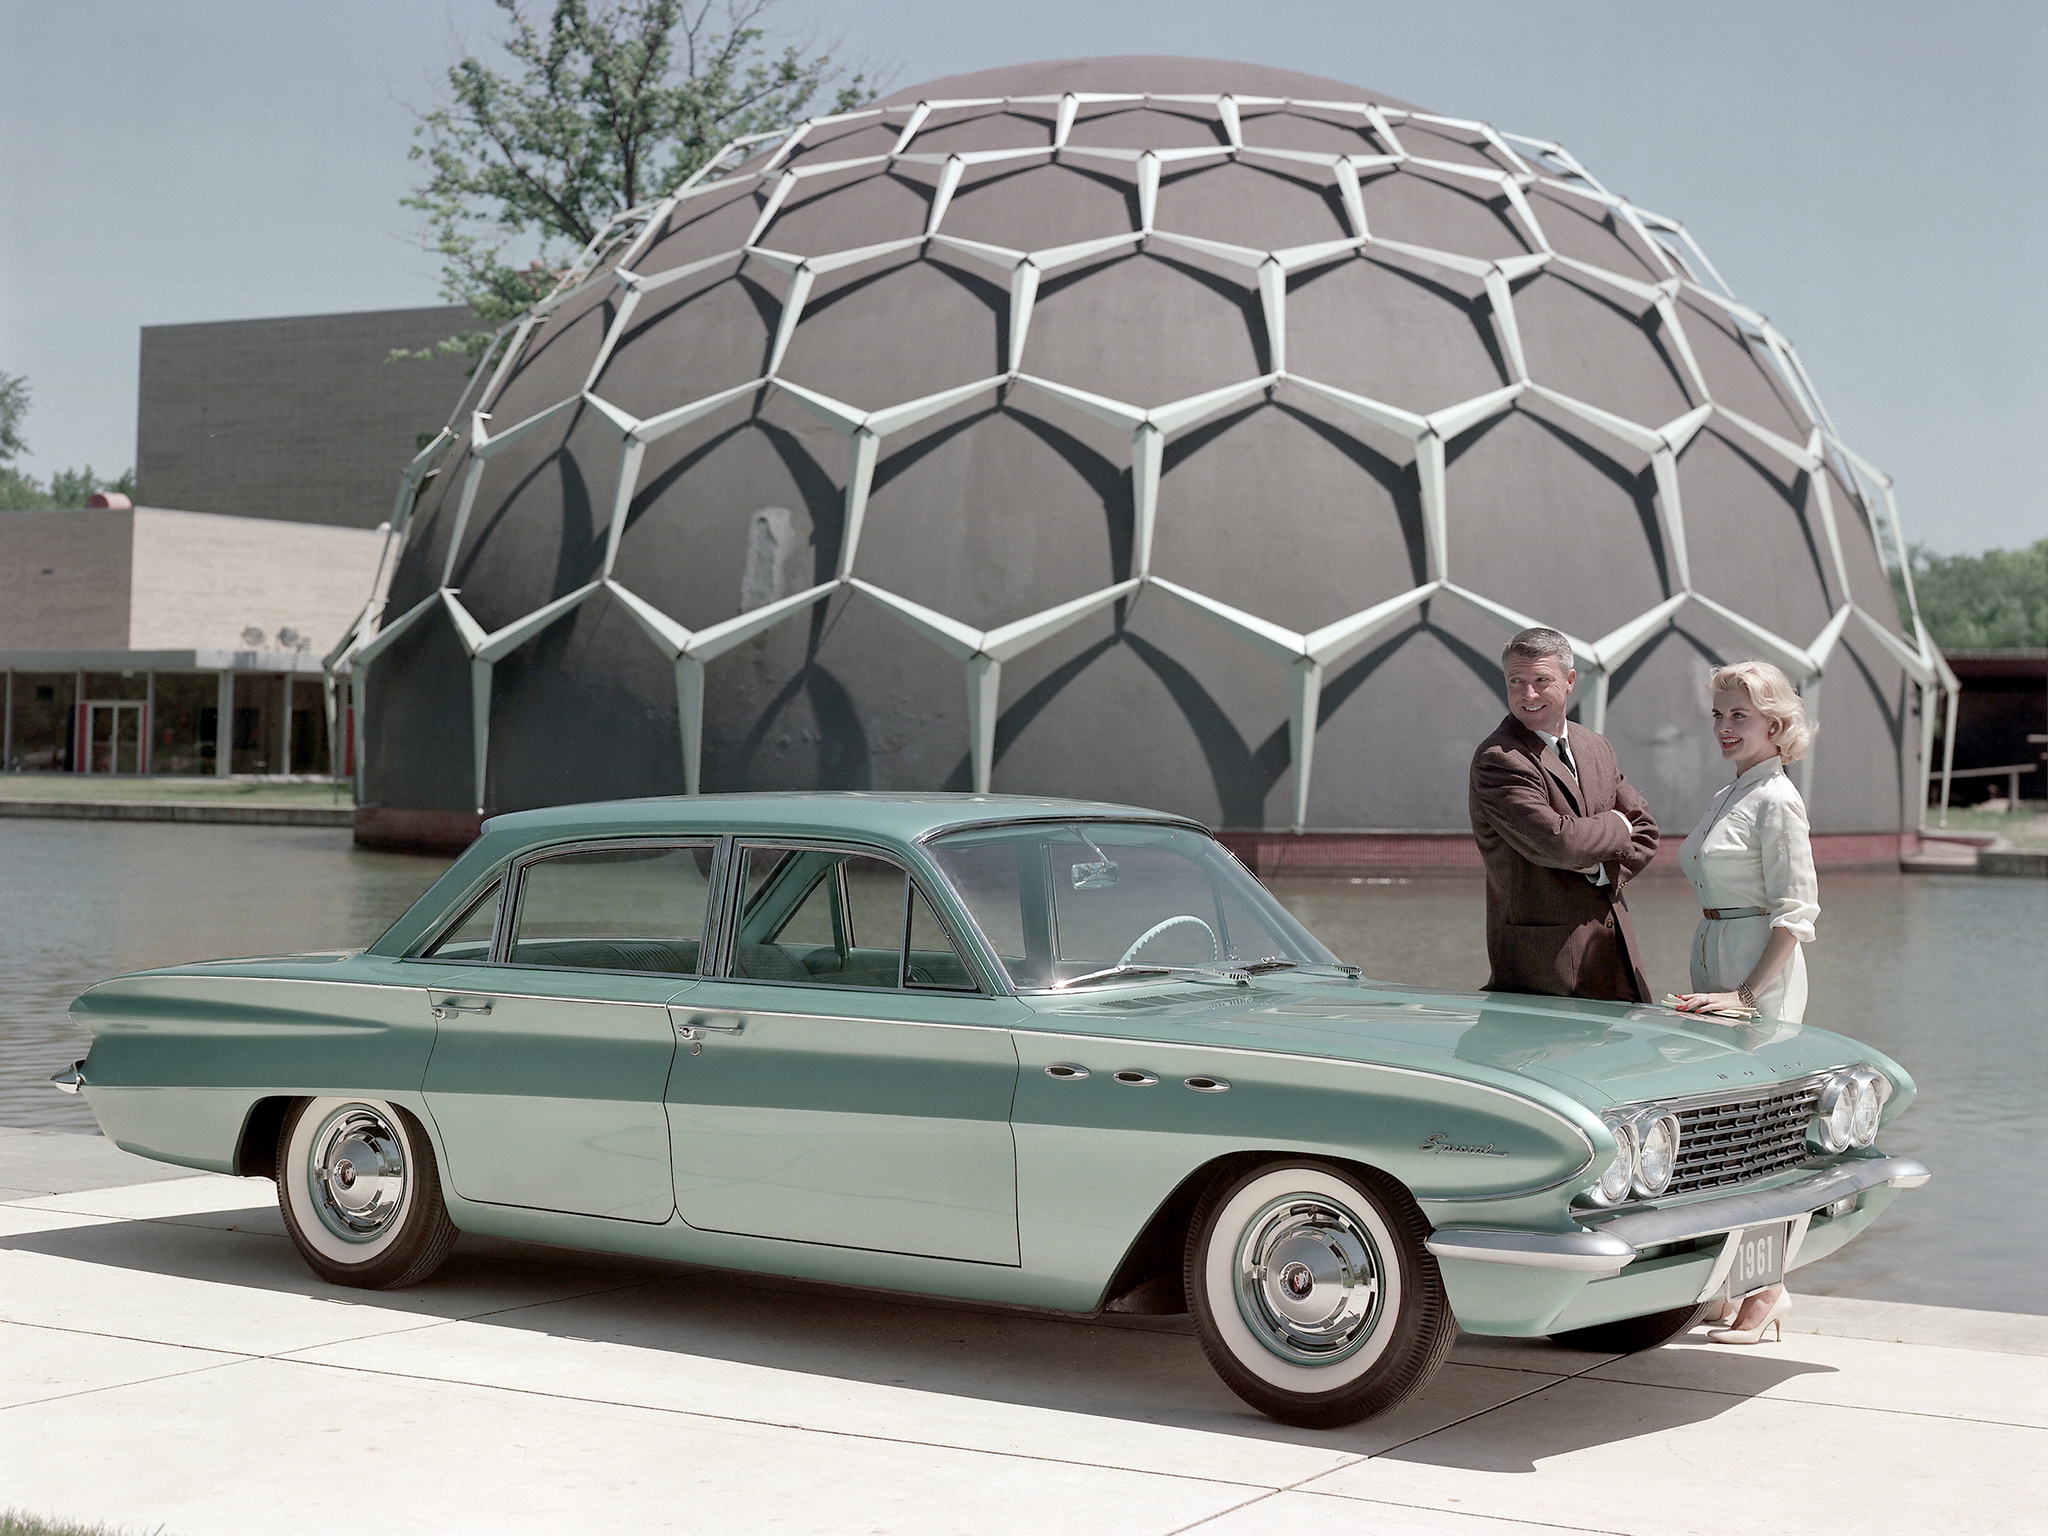 Buick special 1961